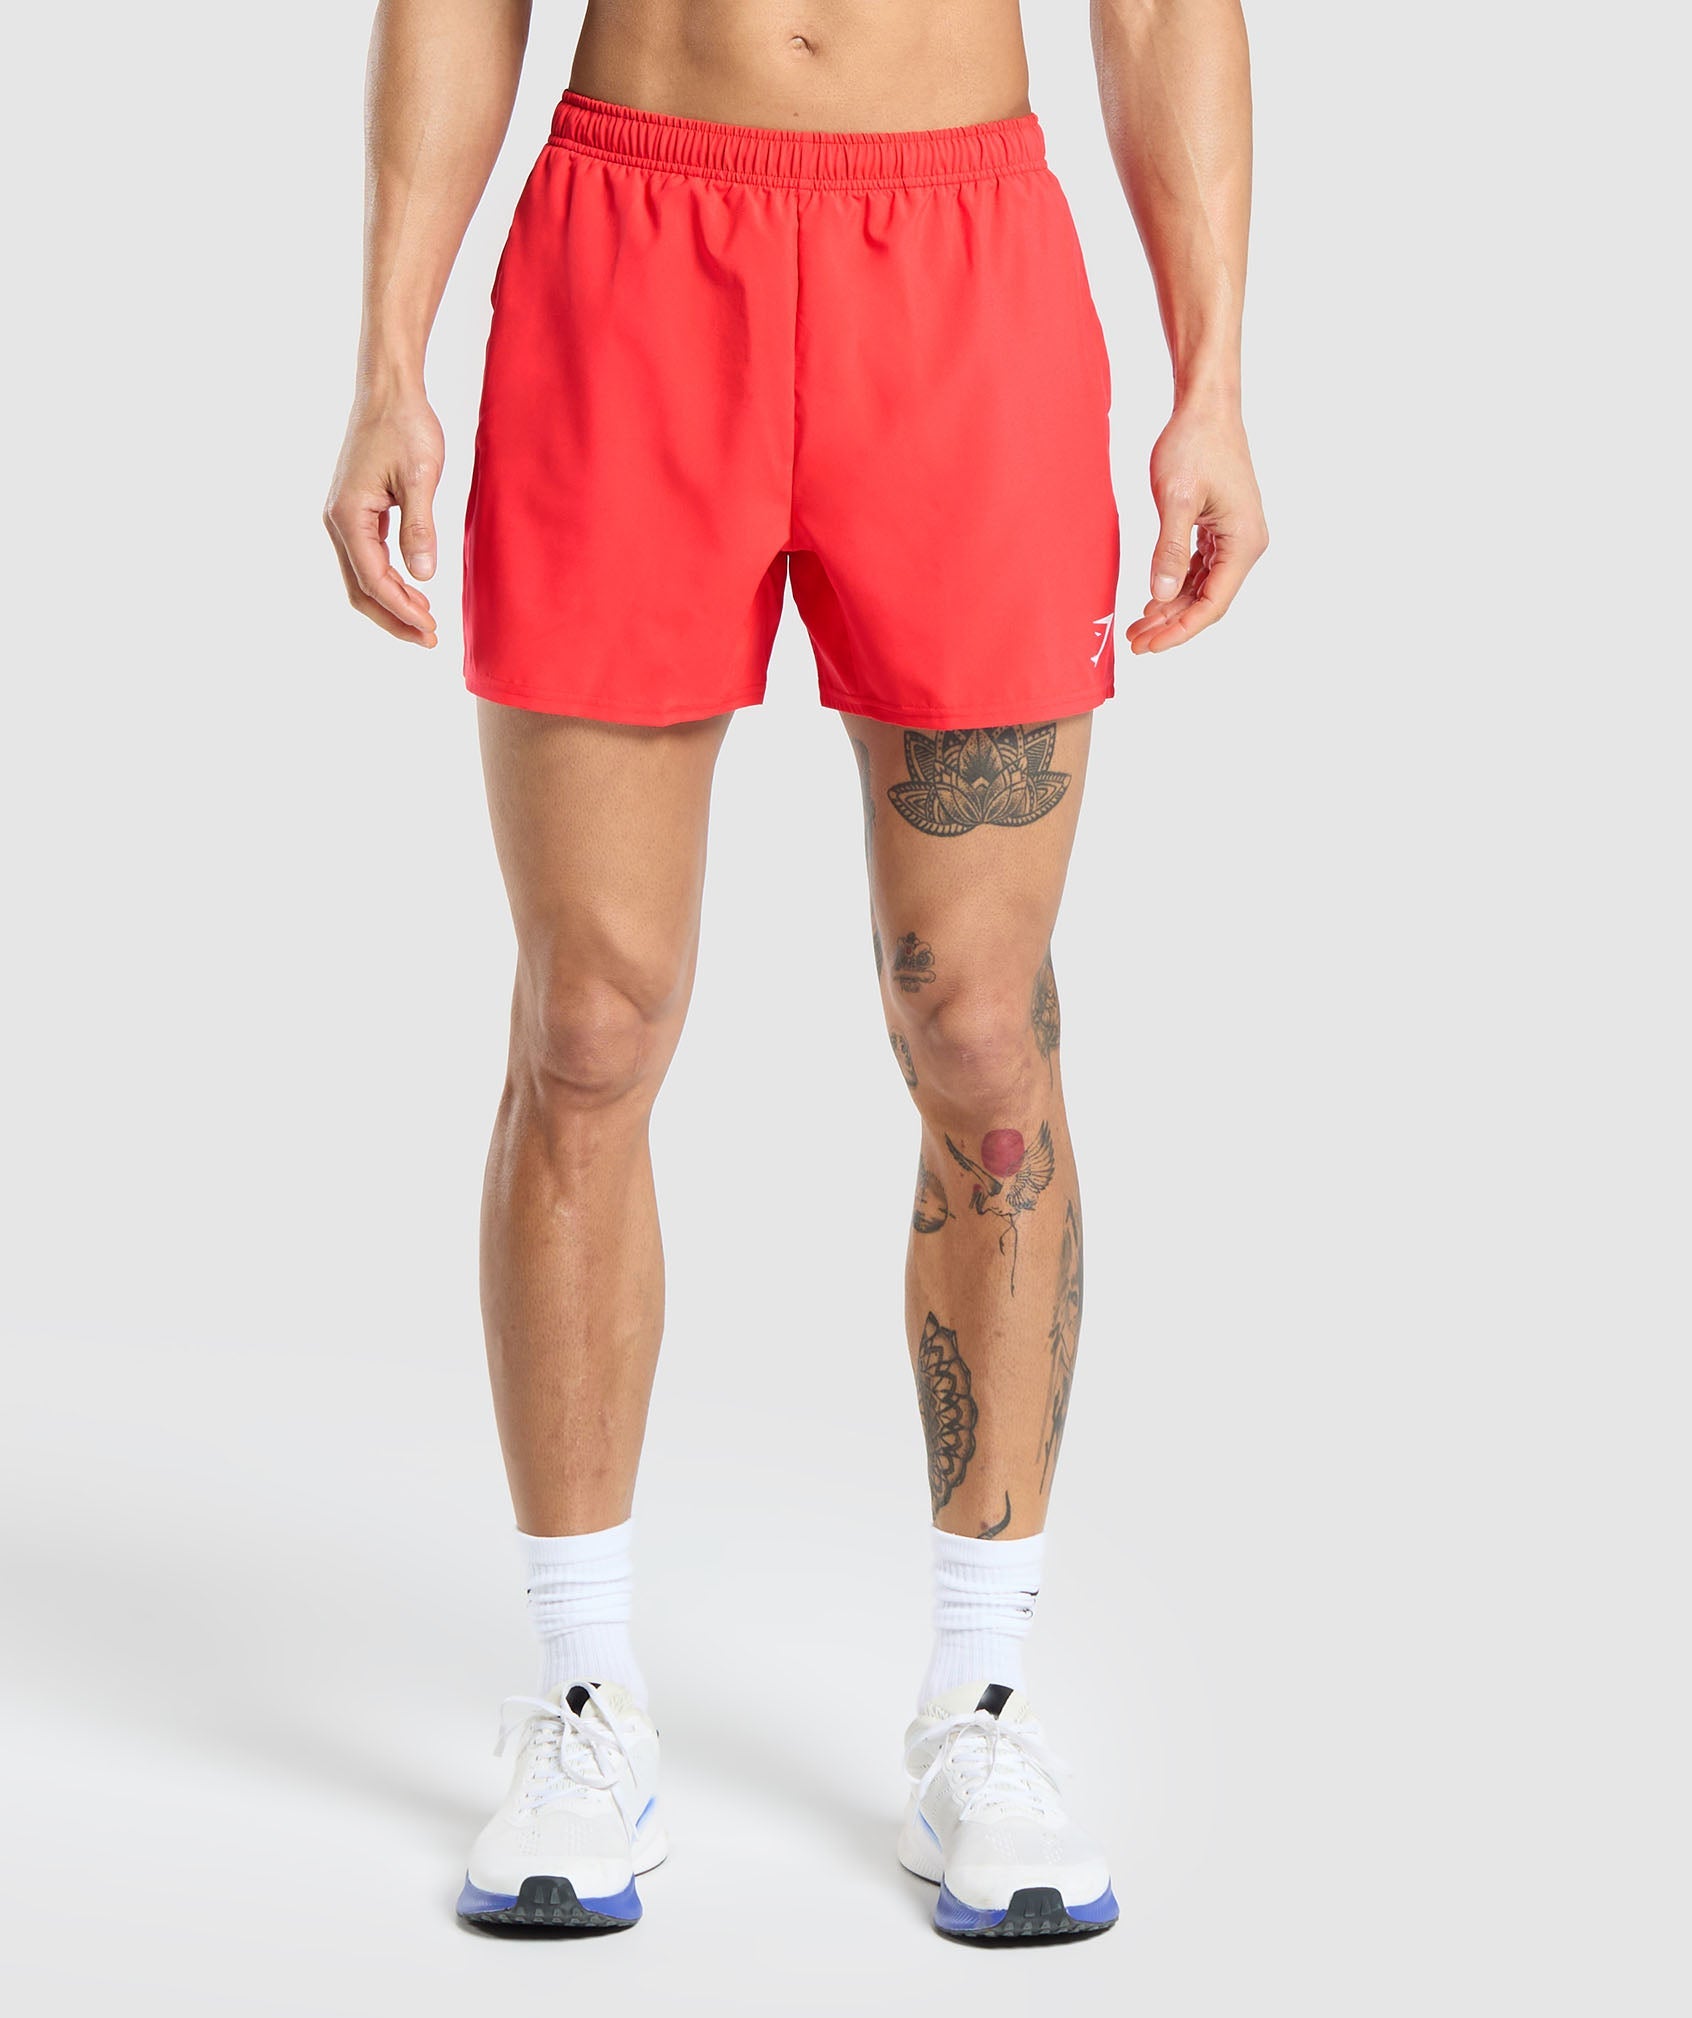 Arrival 5" Shorts in Pow Red - view 1